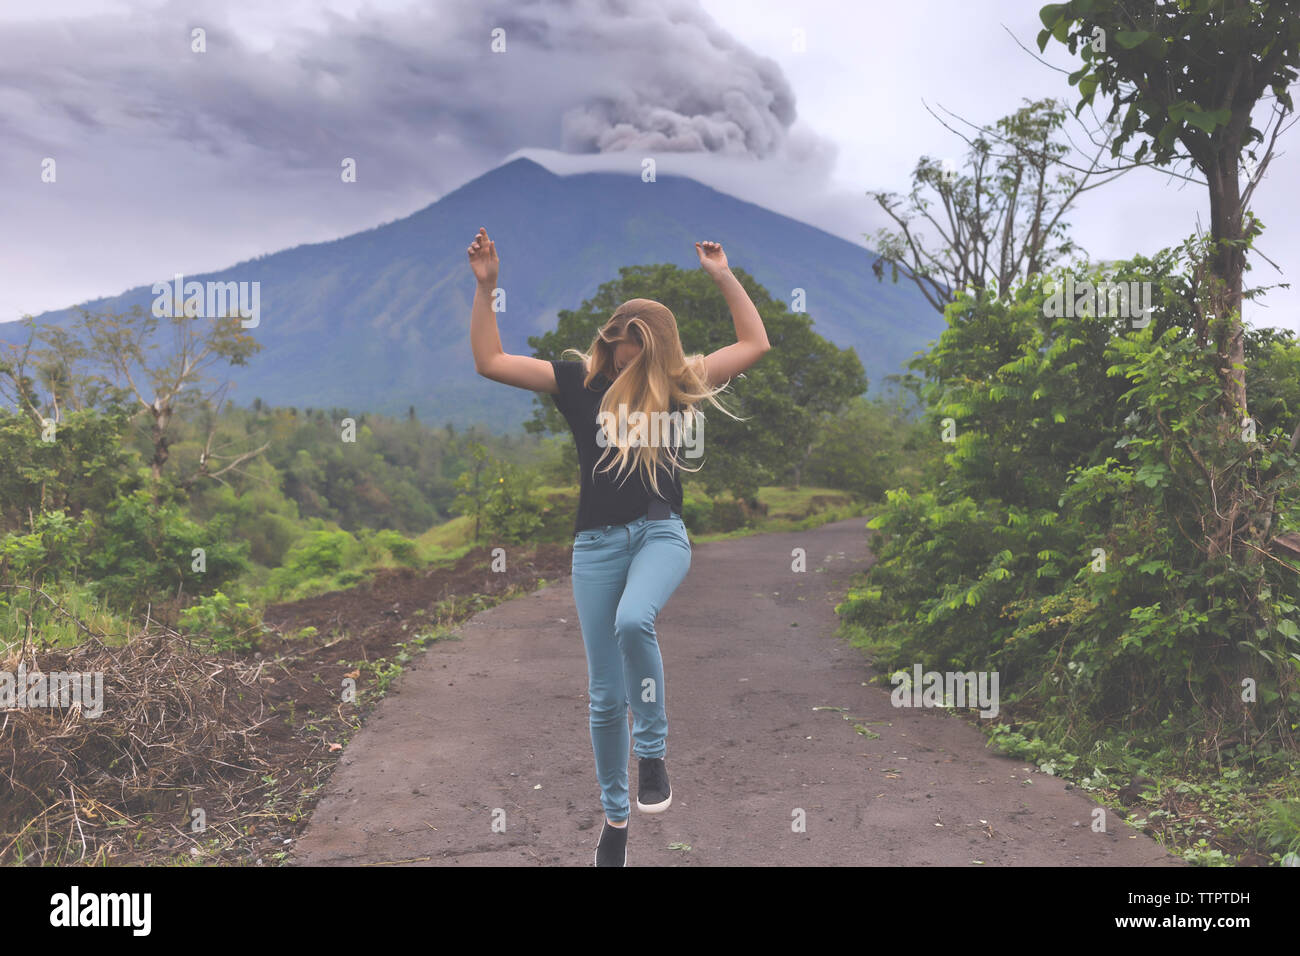 Full length of happy woman dancing on road against smoke erupting volcanic mountain Stock Photo